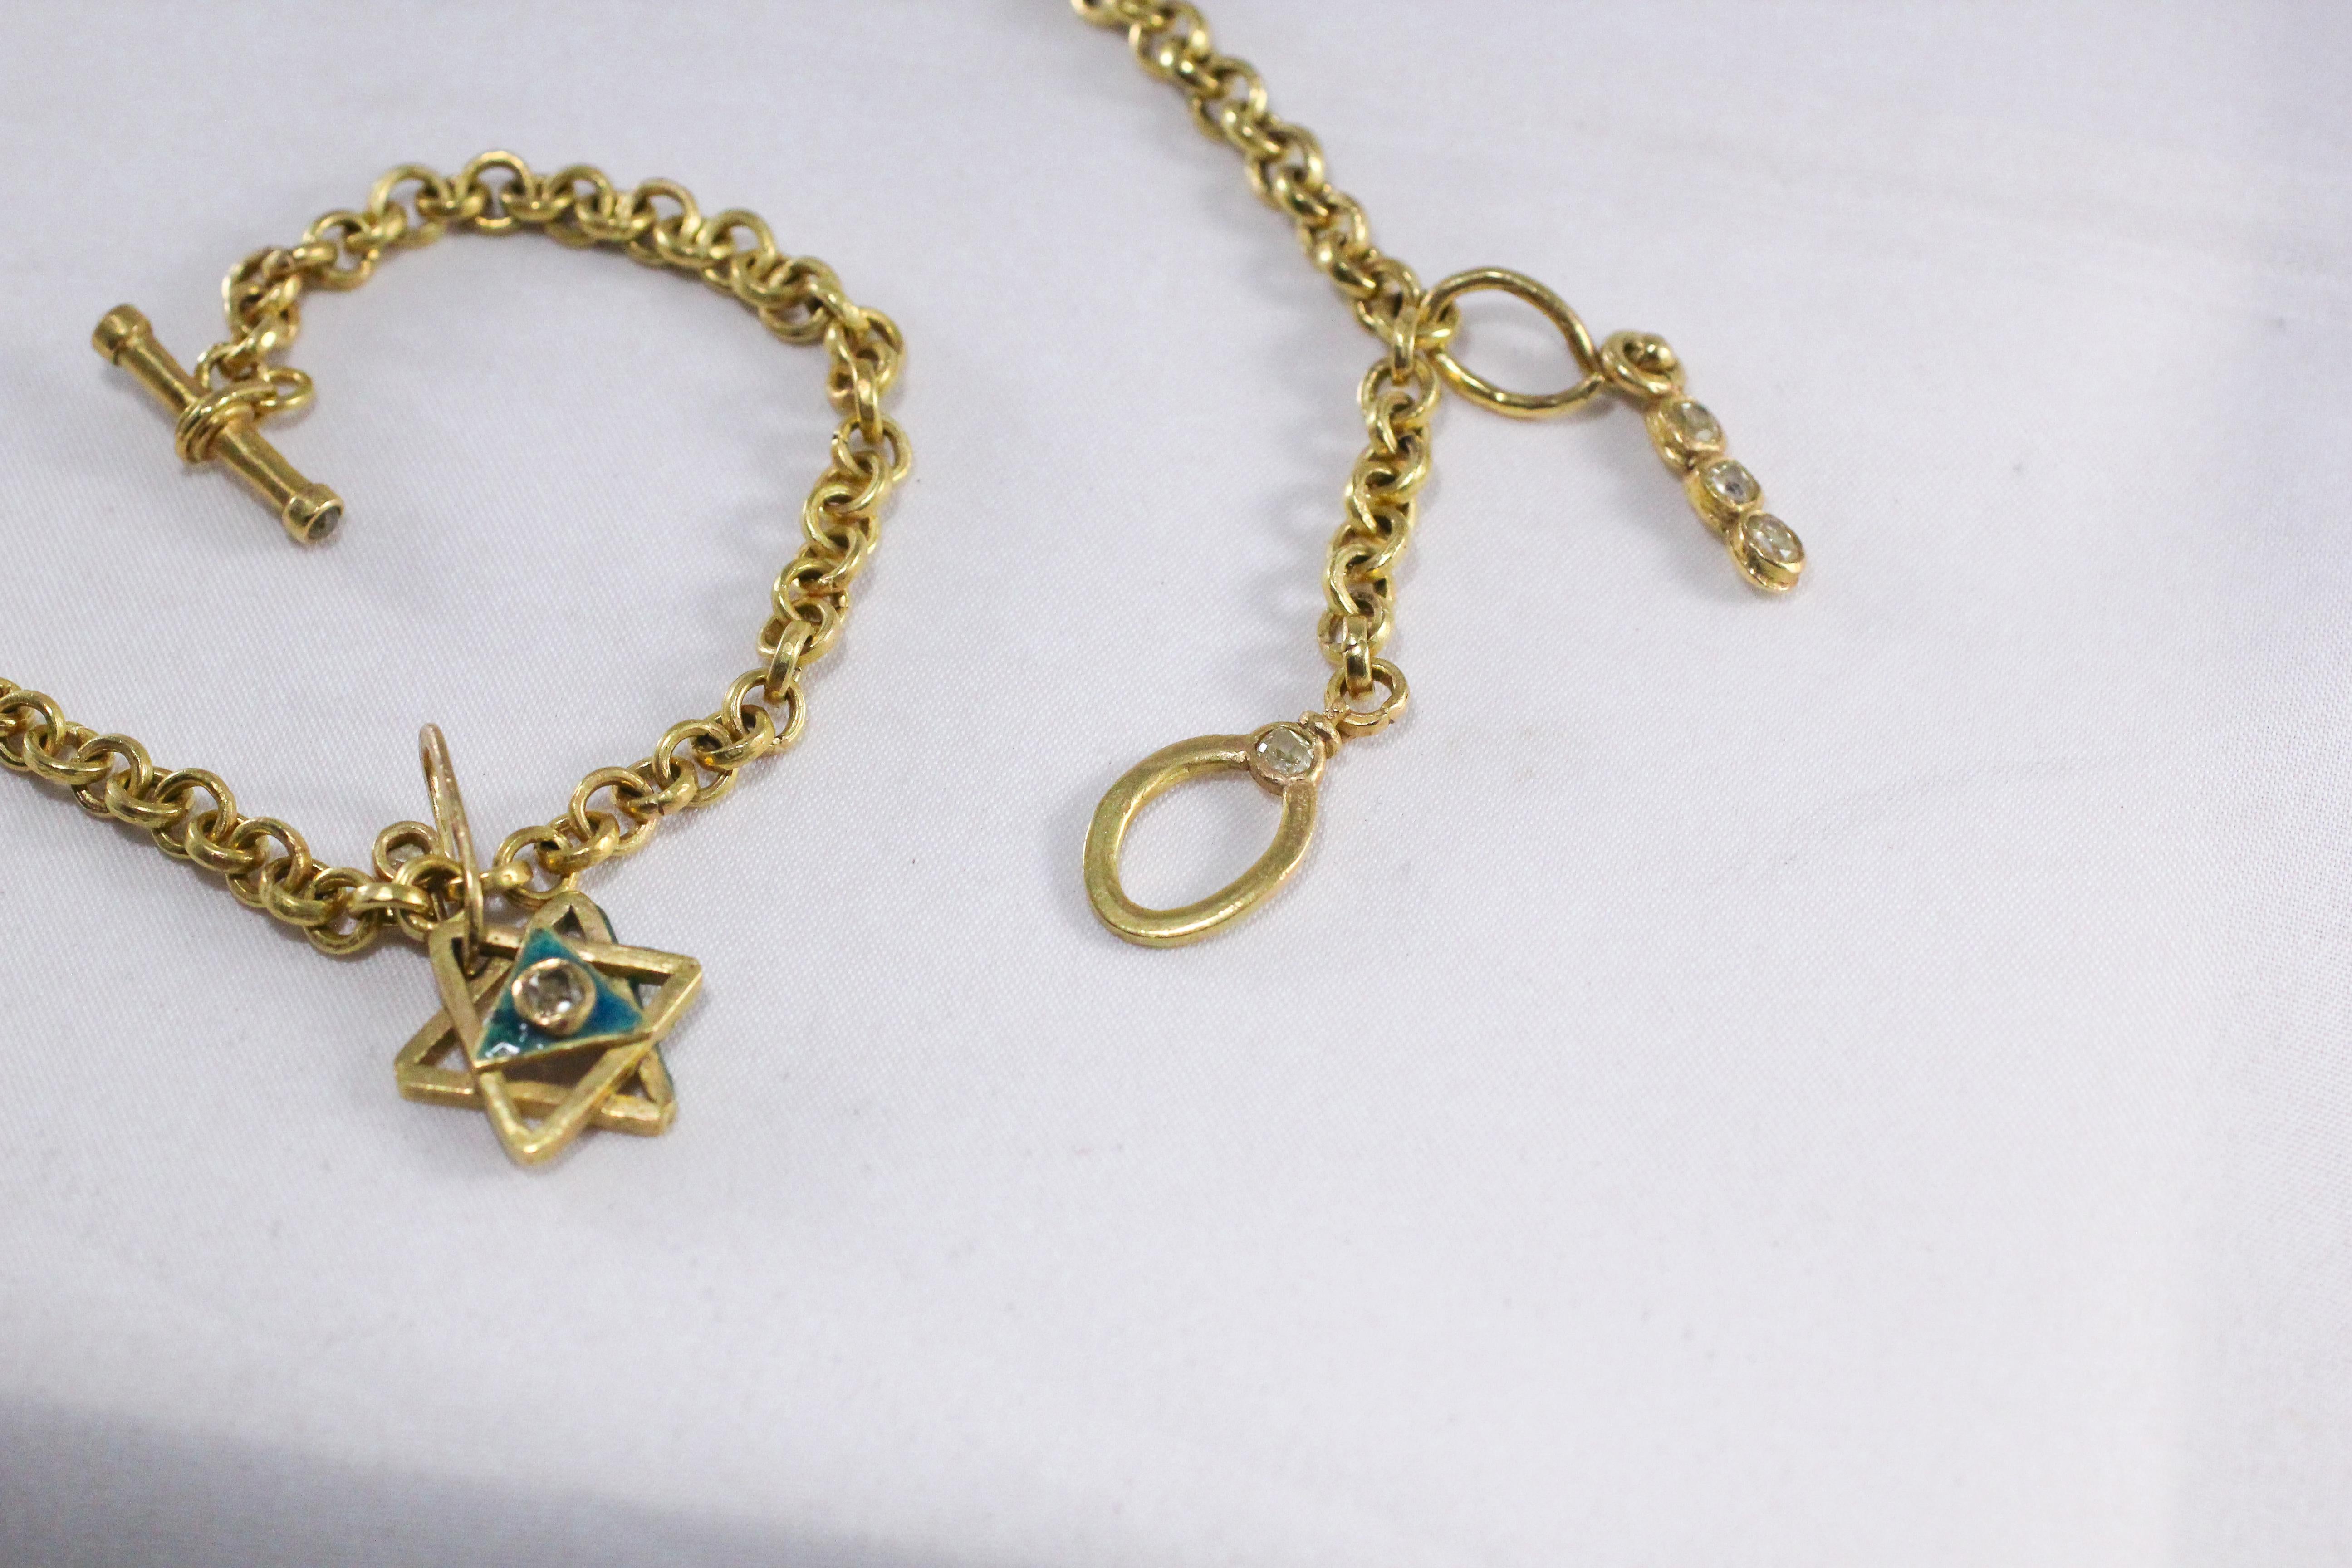 Modern Enamel Magen David 18K Gold Chain Necklace Diamond Enhancer and Toggle Clasp For Sale